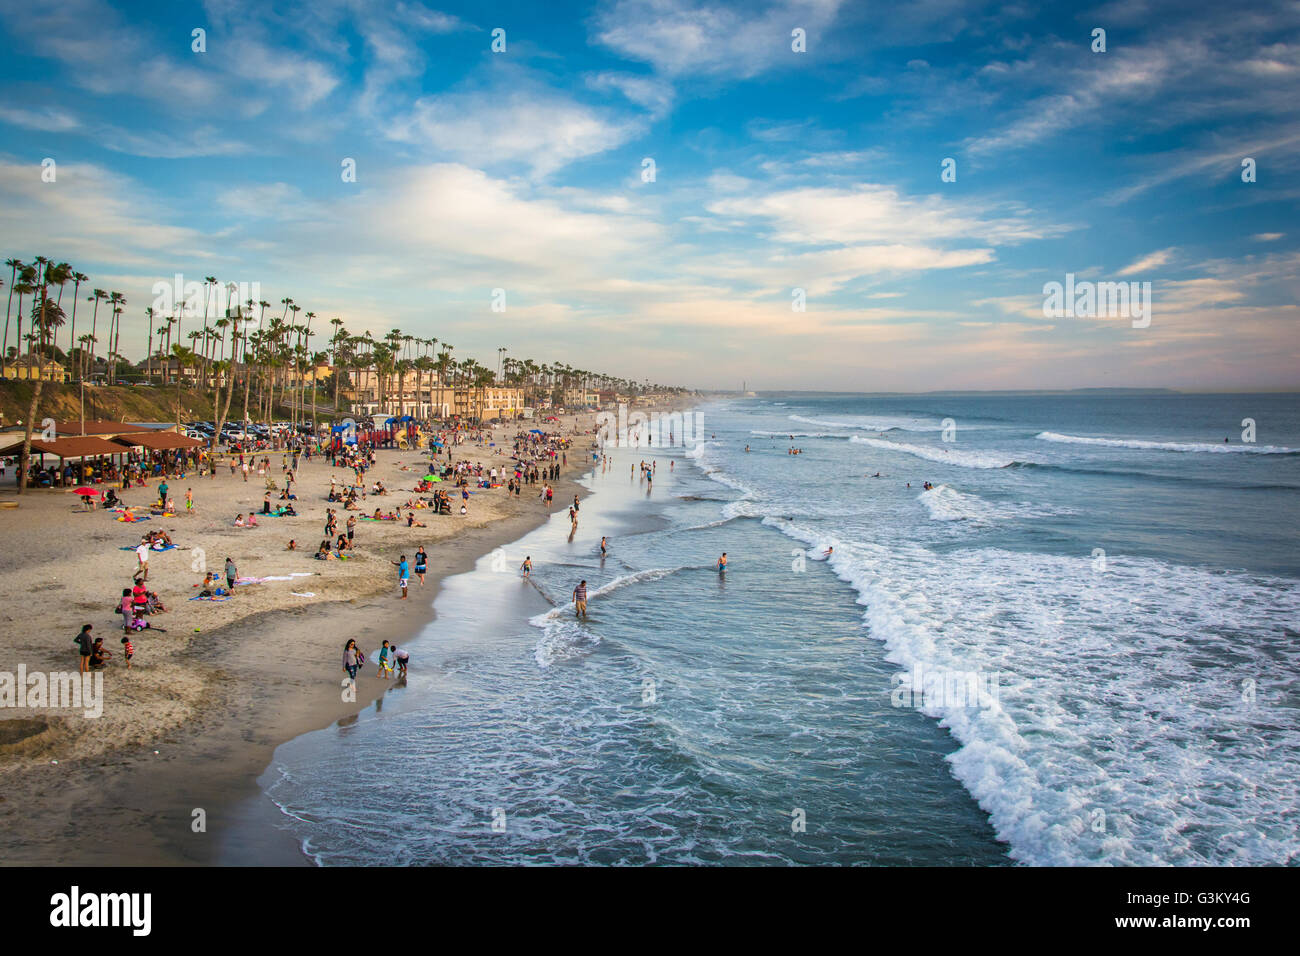 View of the beach from the pier at sunset, in Oceanside, California. Stock Photo